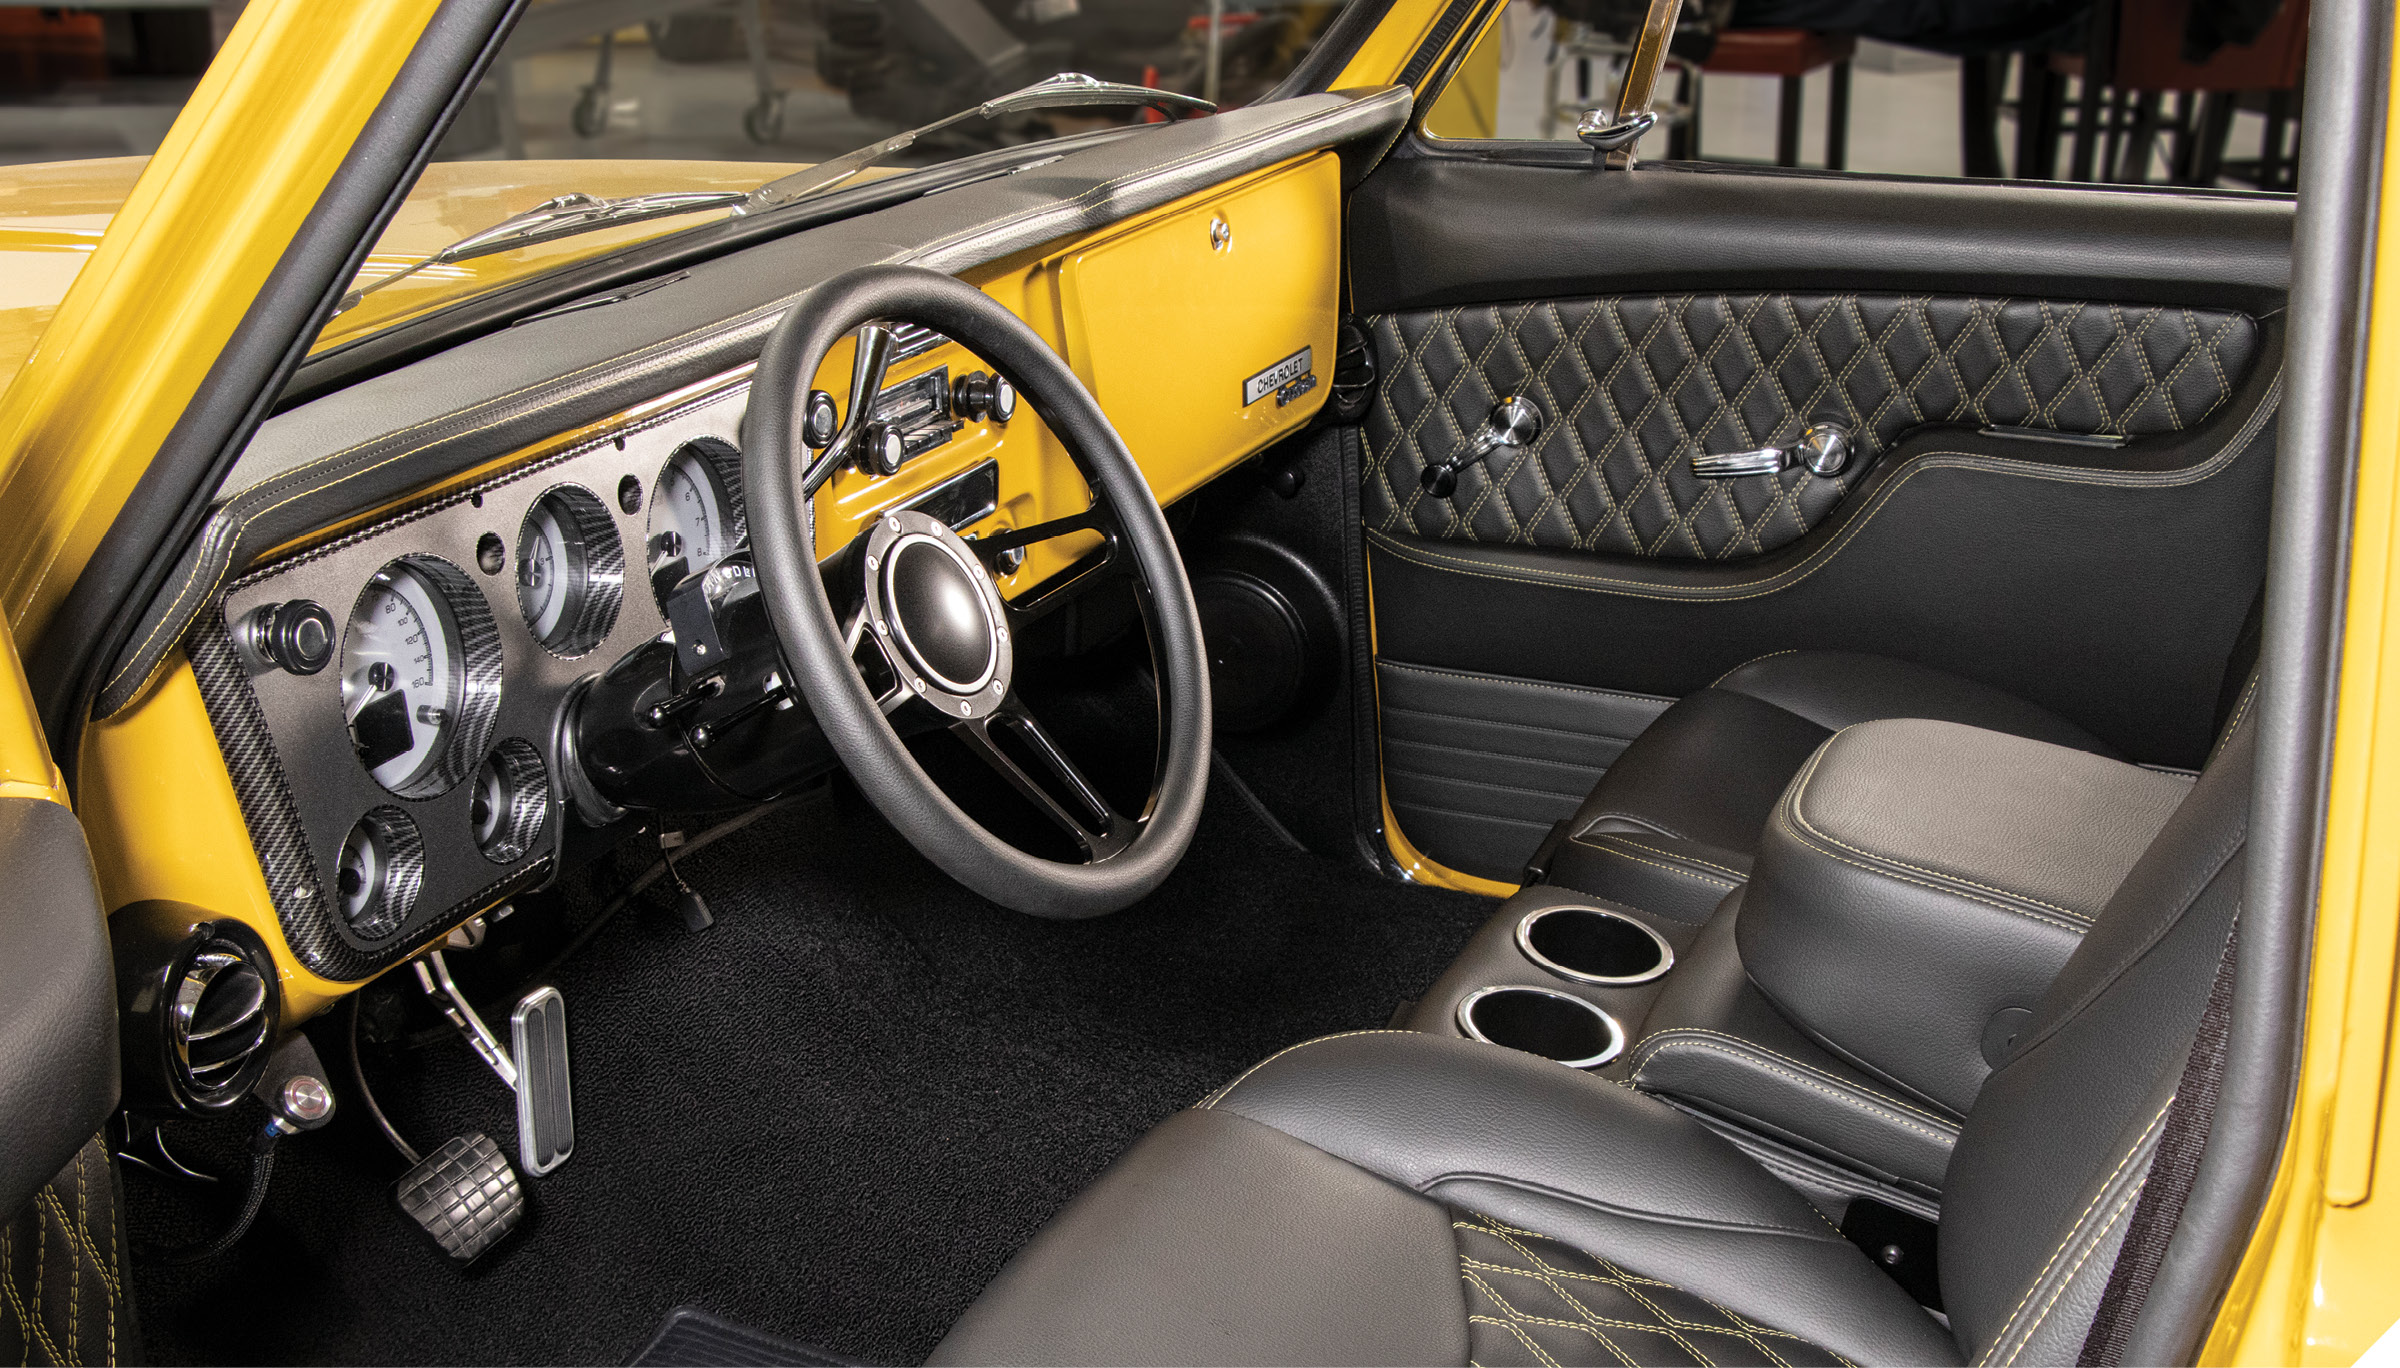 When all’s said and done, this is the new interior outlook your C10 (or F-100 or?) will have on life with a fresh, new TMI Products interior … without waiting on anyone but yourself and the parcel delivery person!